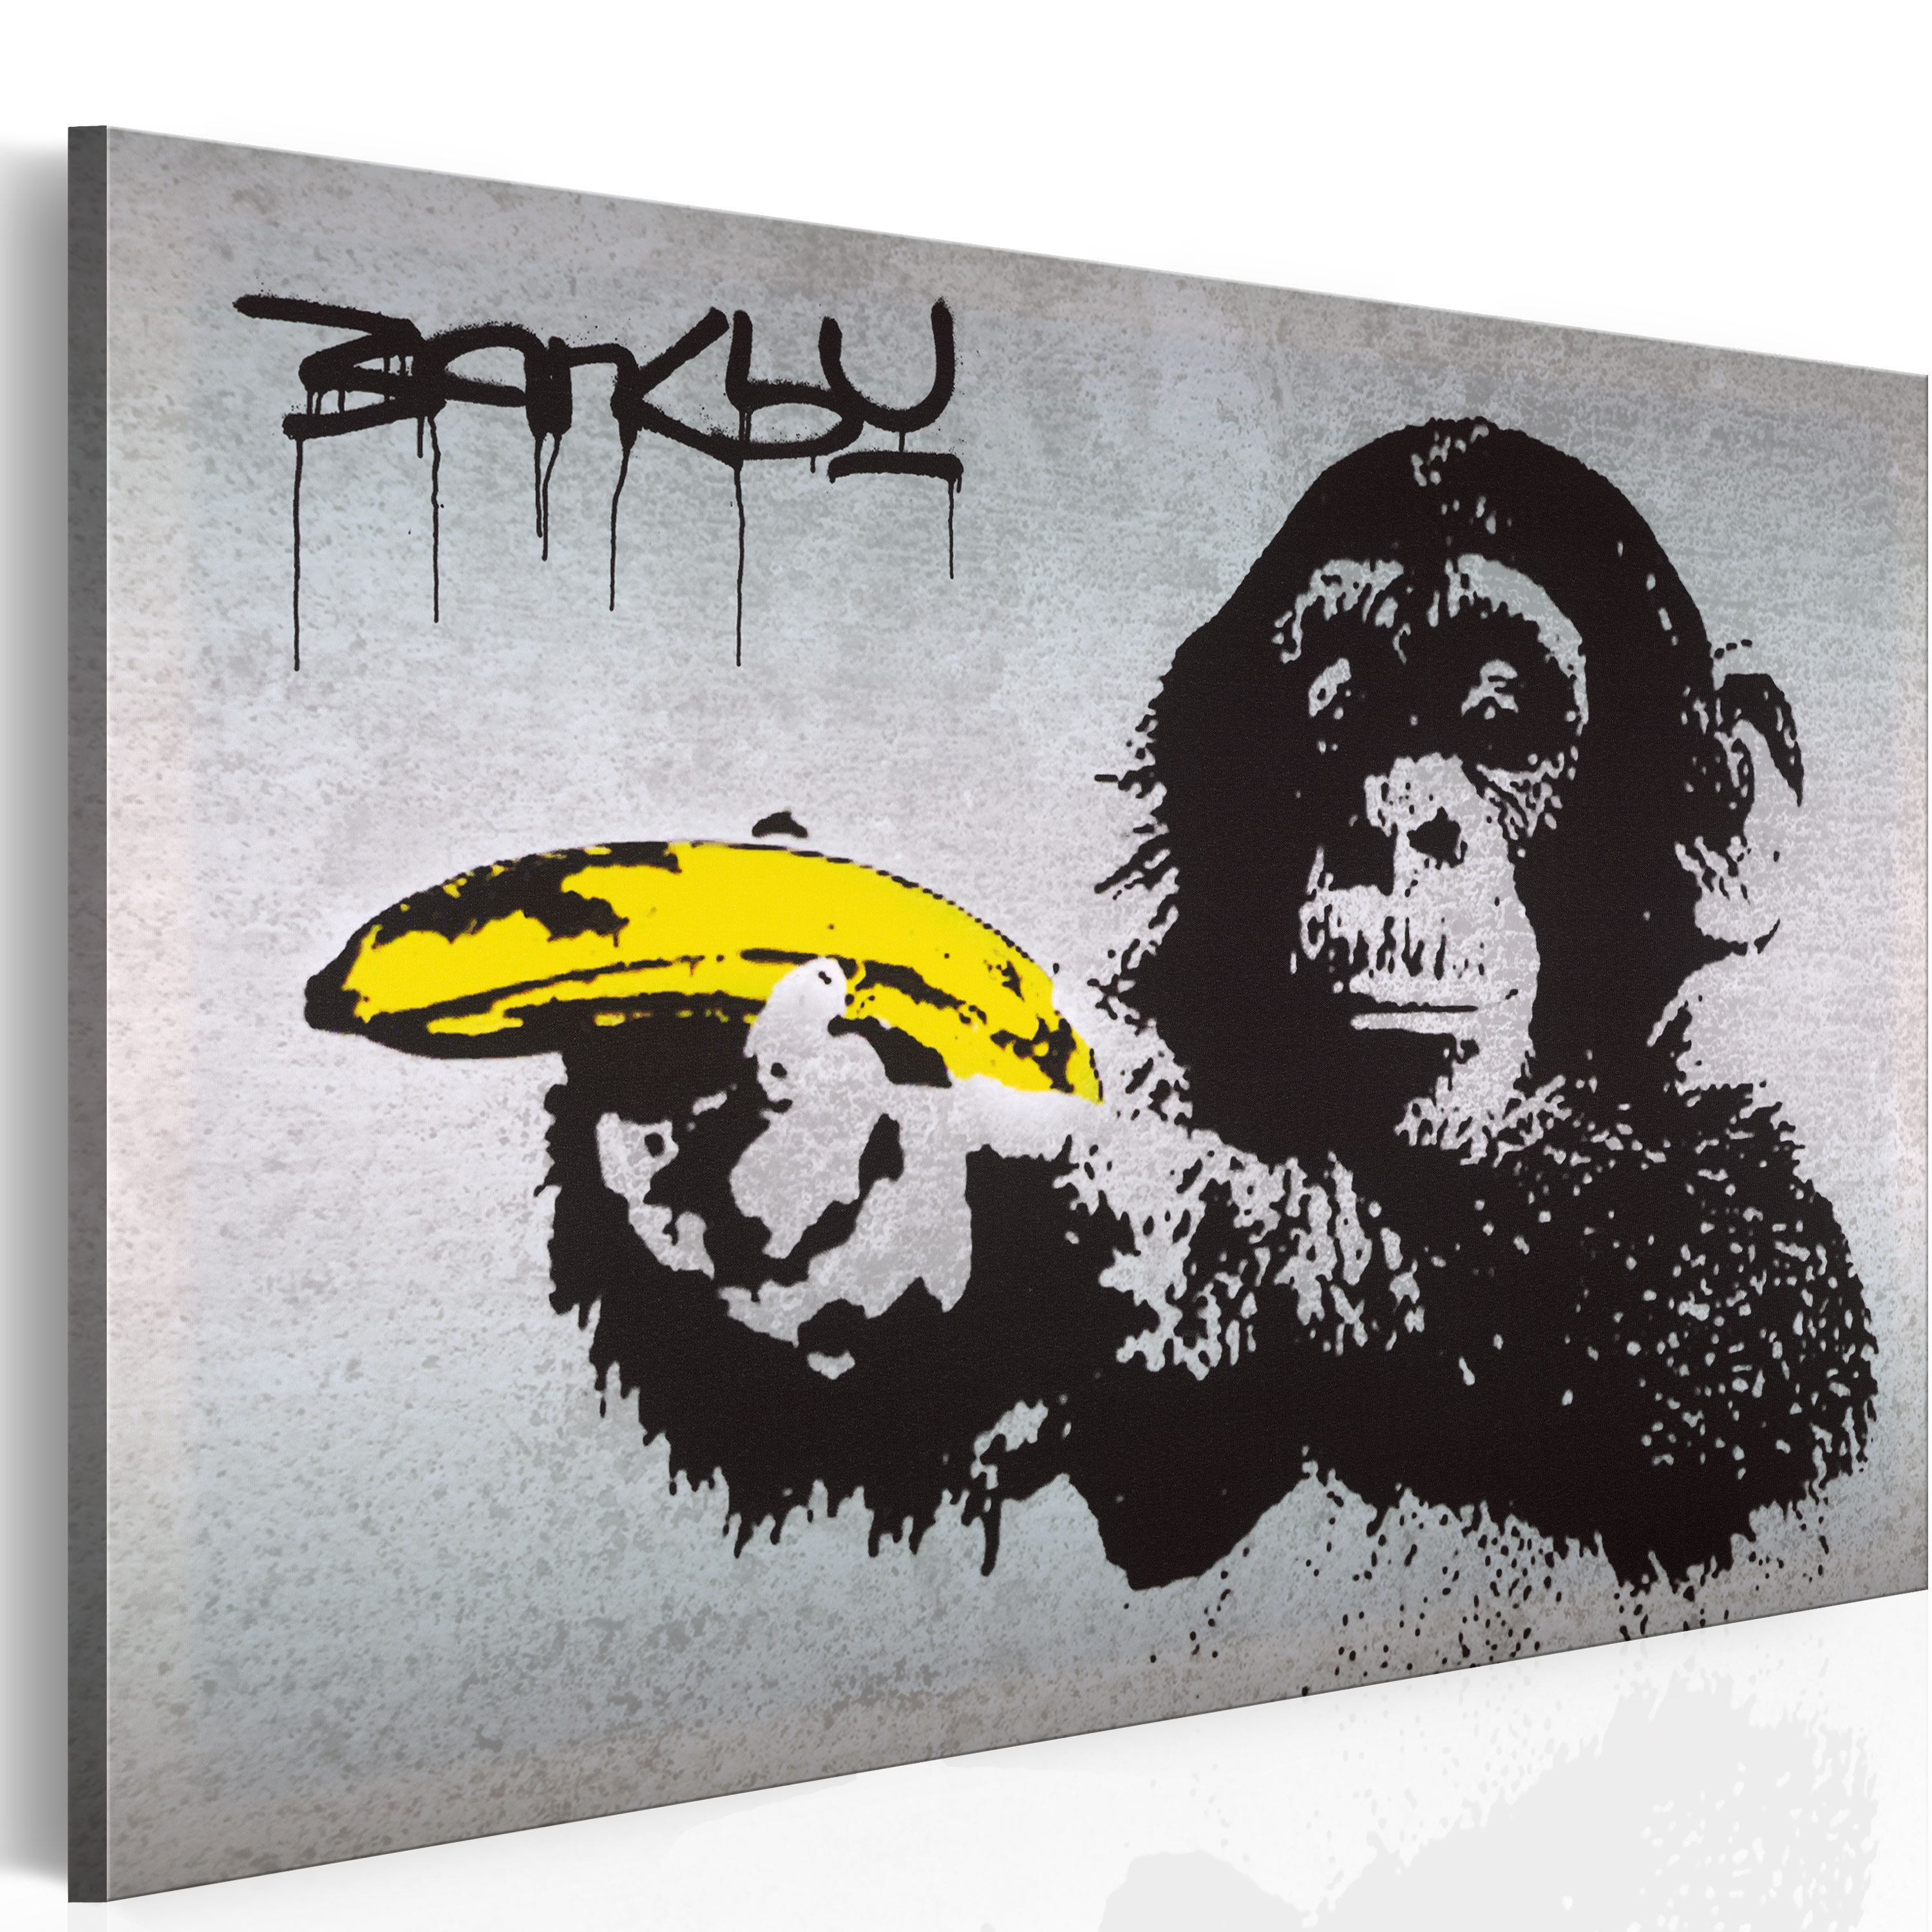 Trinx Stop Or The Monkey Will Shoot! by Banksy Graphic Art